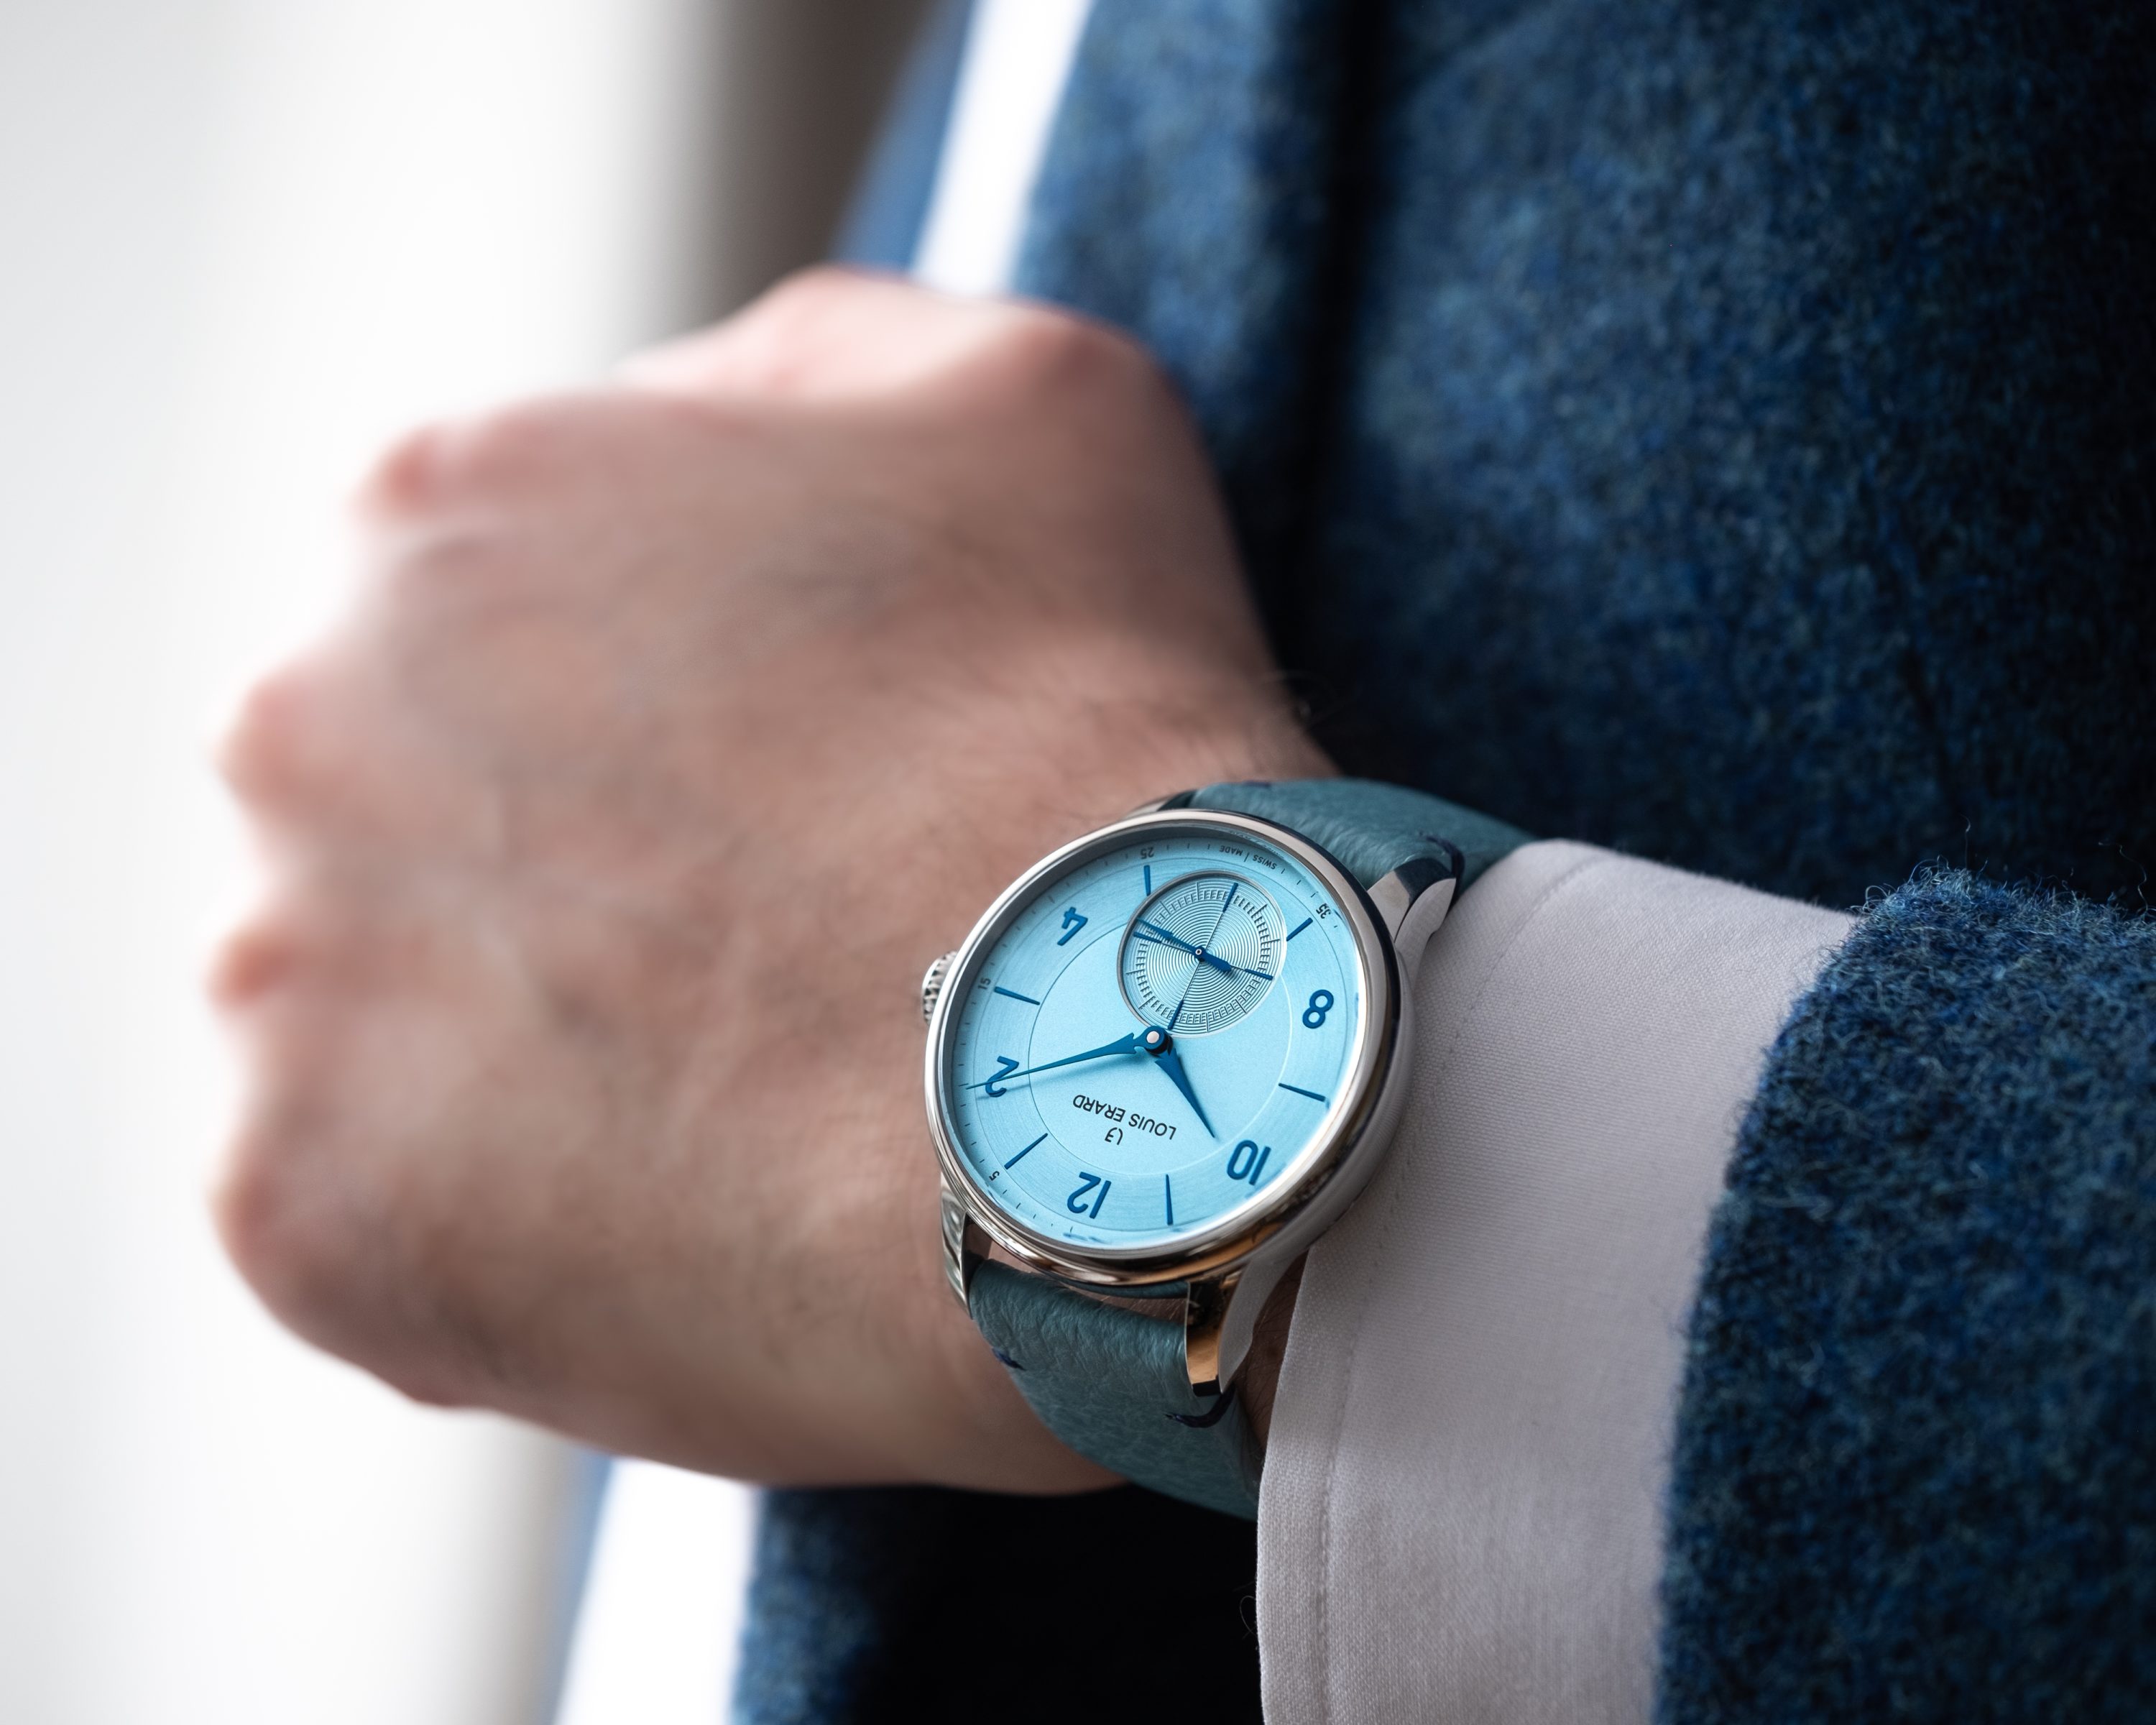 Louis Erard's New Limited Edition Takes Wood Dials to a New